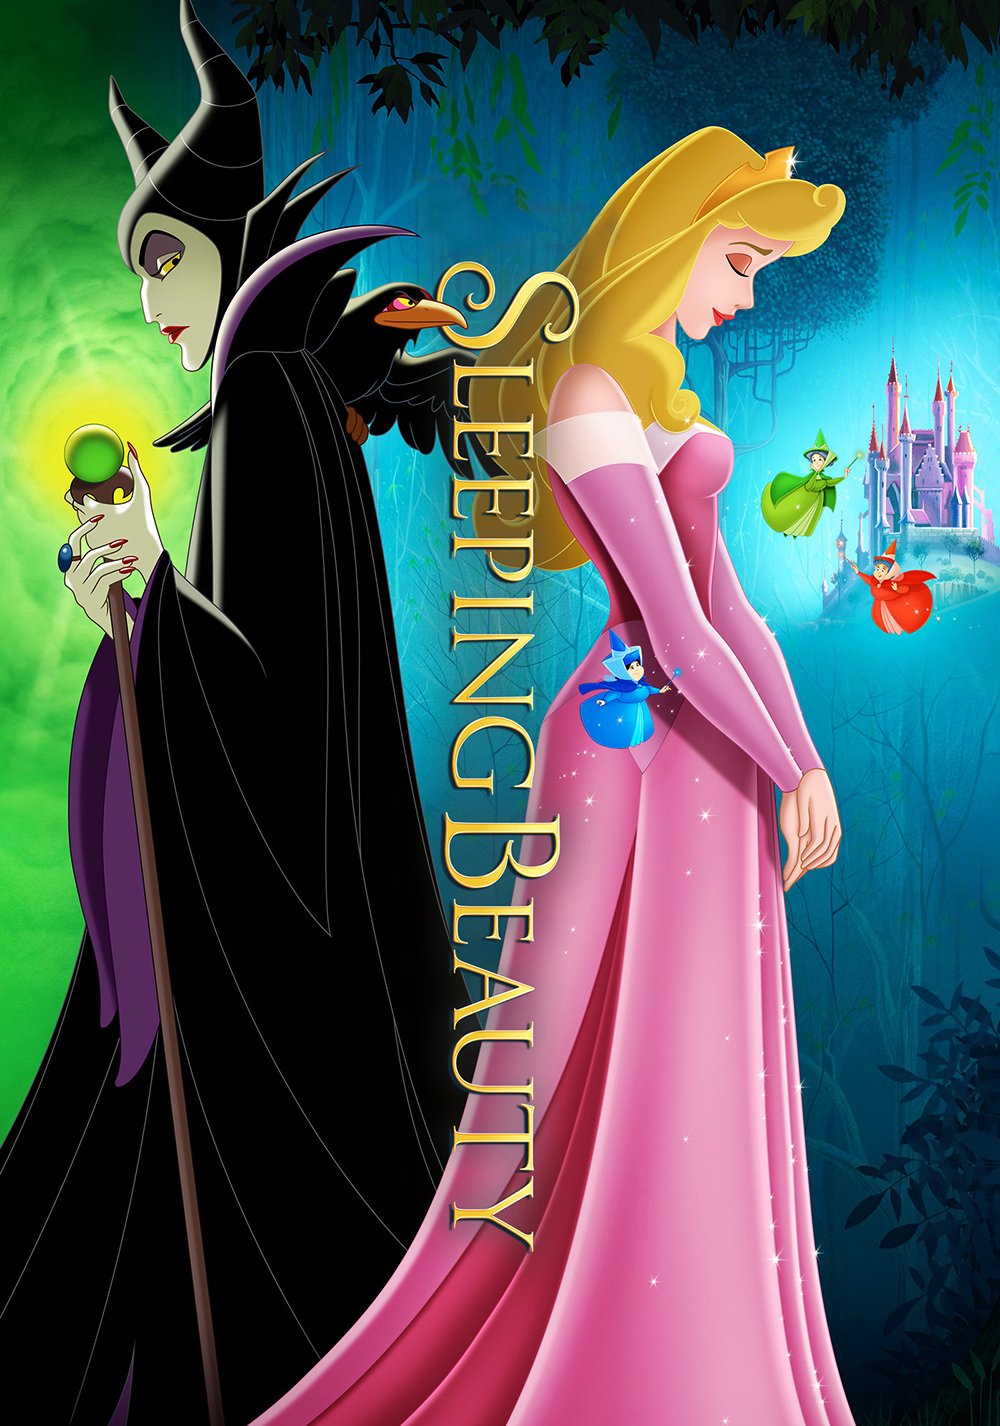 Sleeping Beauty (1959) Movie Poster - ID: 124410 - Image Abyss